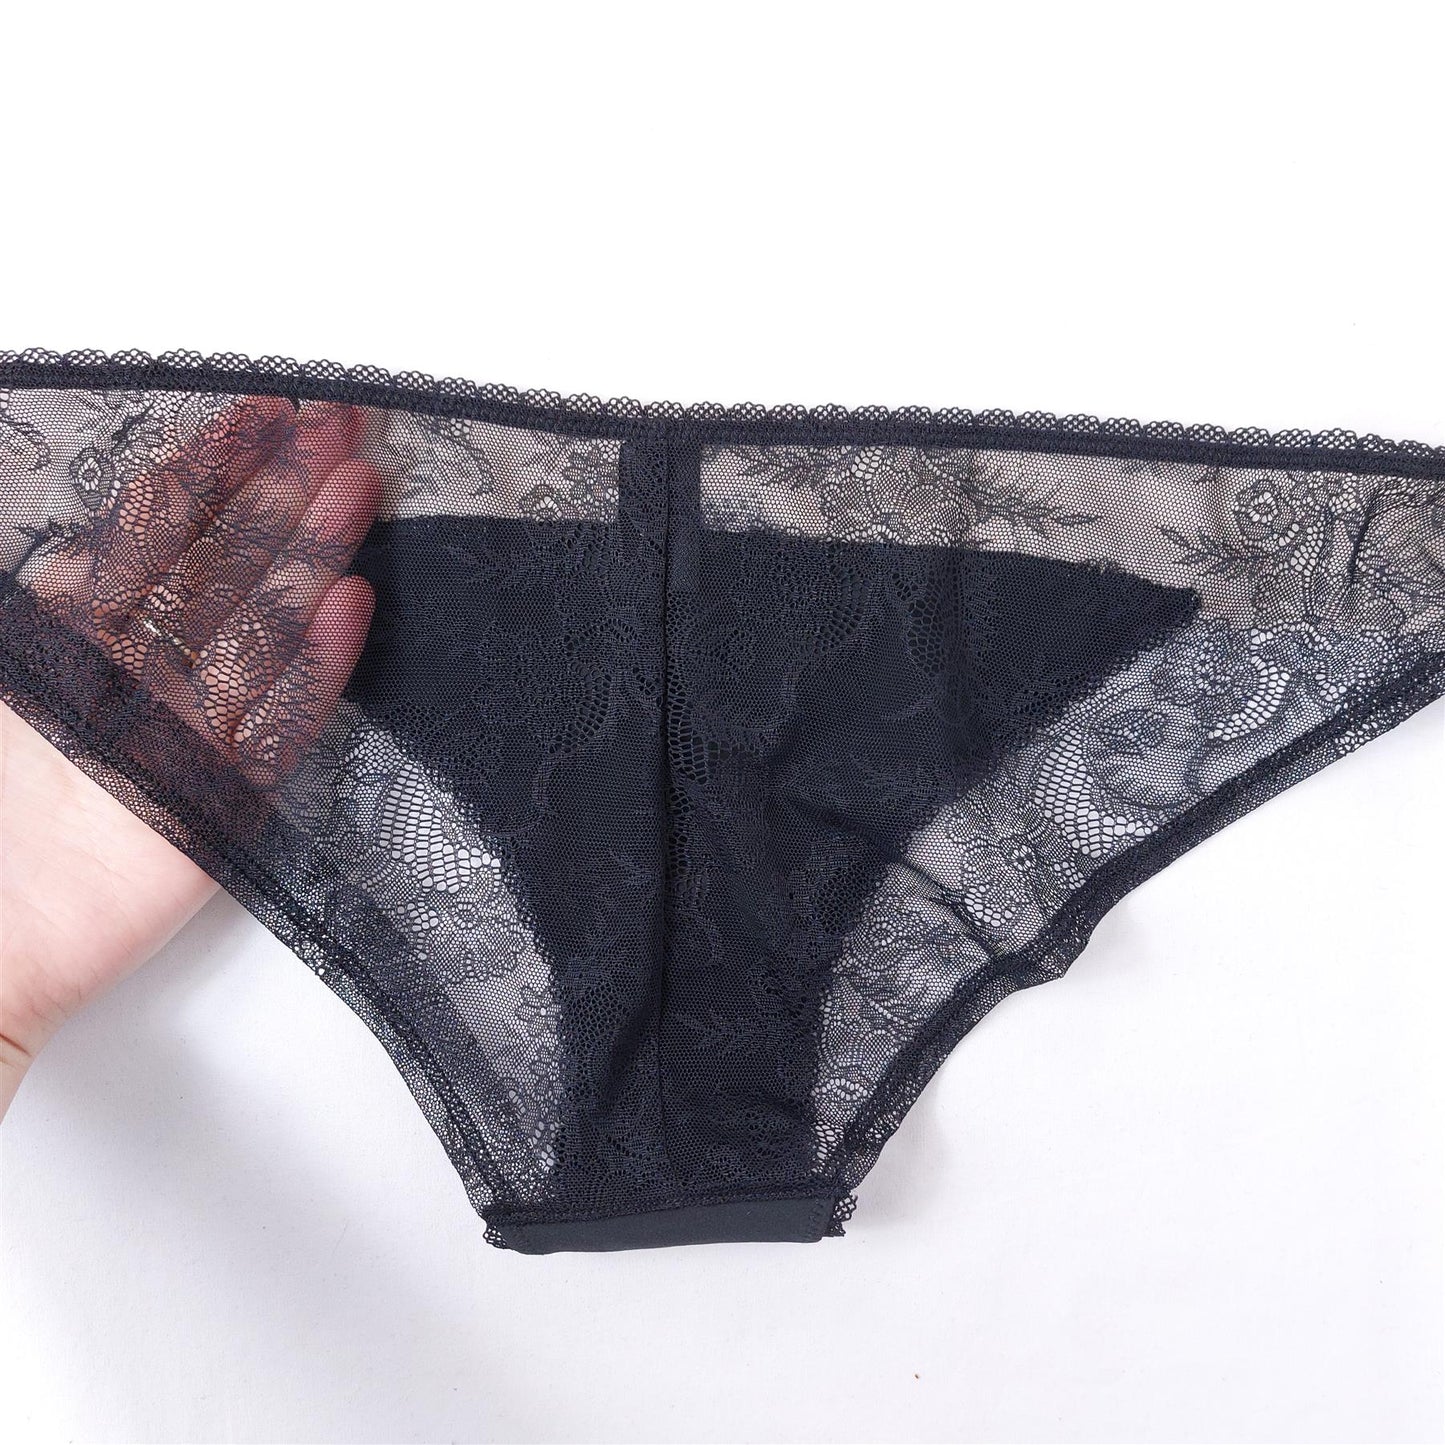 Lace Brief Knickers 3x Pairs